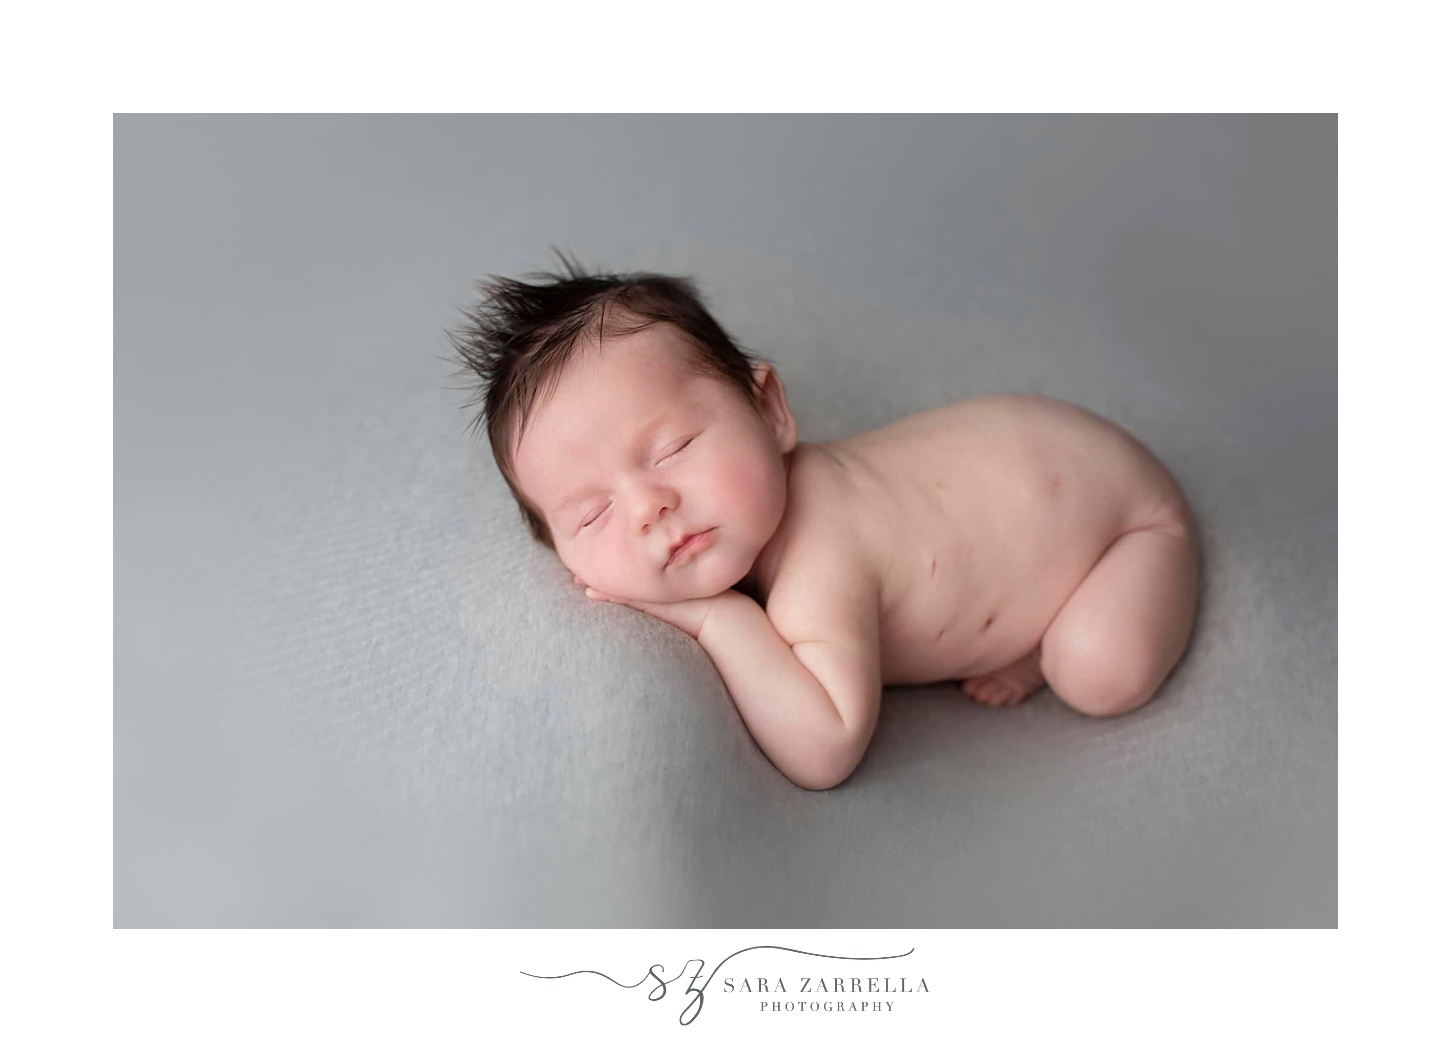 baby with scars from diaphragmatic herniation surgery sleeps during newborn portraits